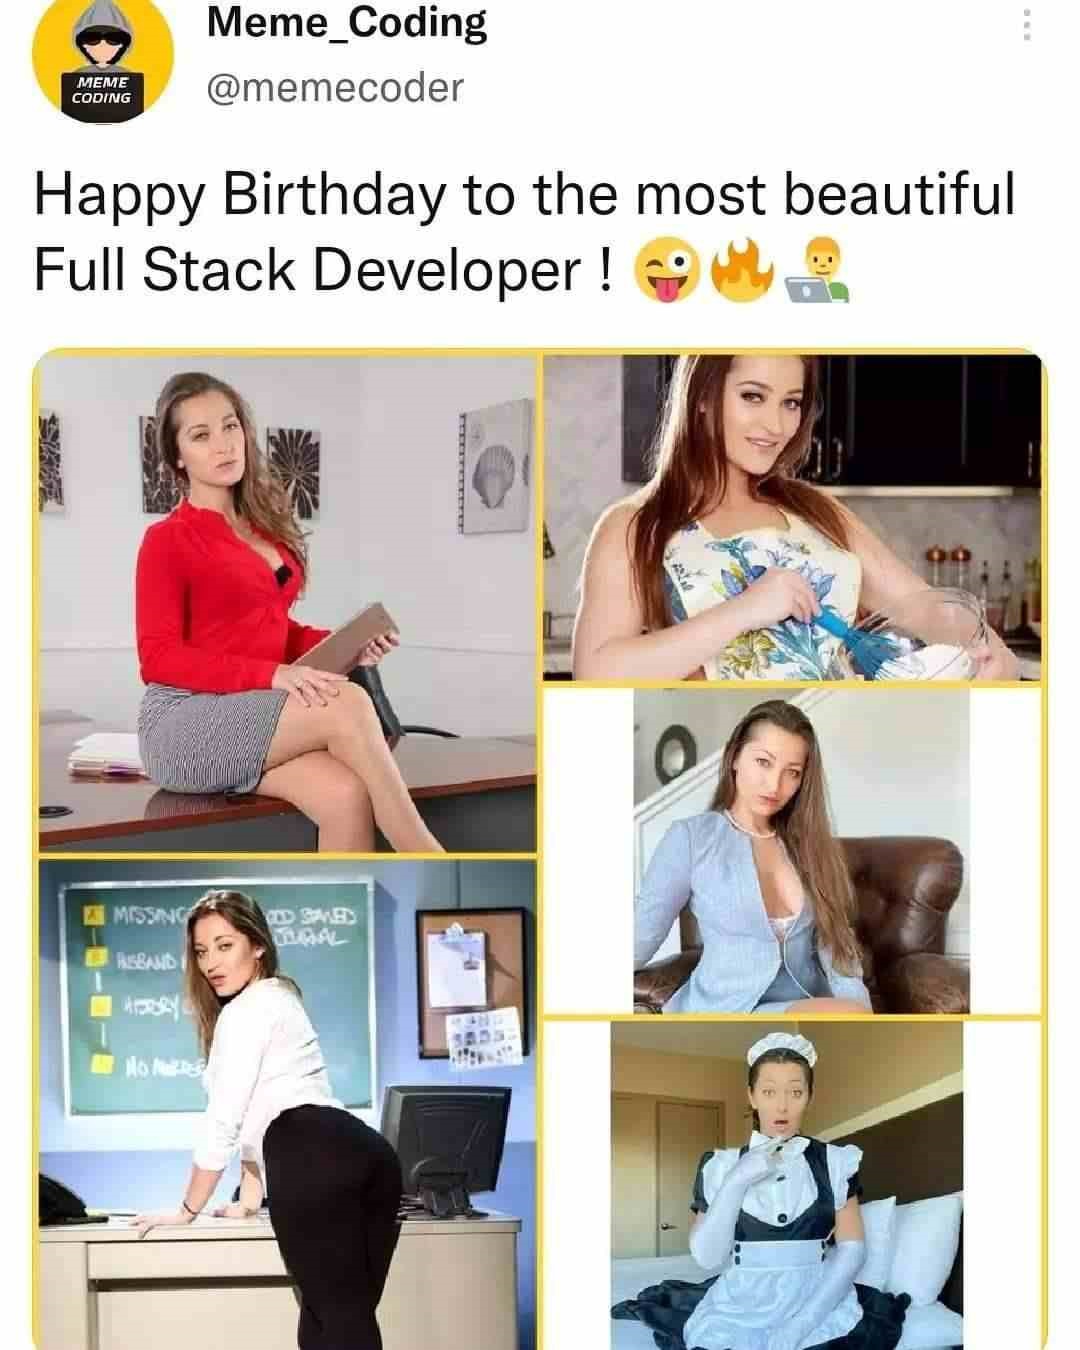 Happy Birthday to the most beautiful Full Stack Developer!